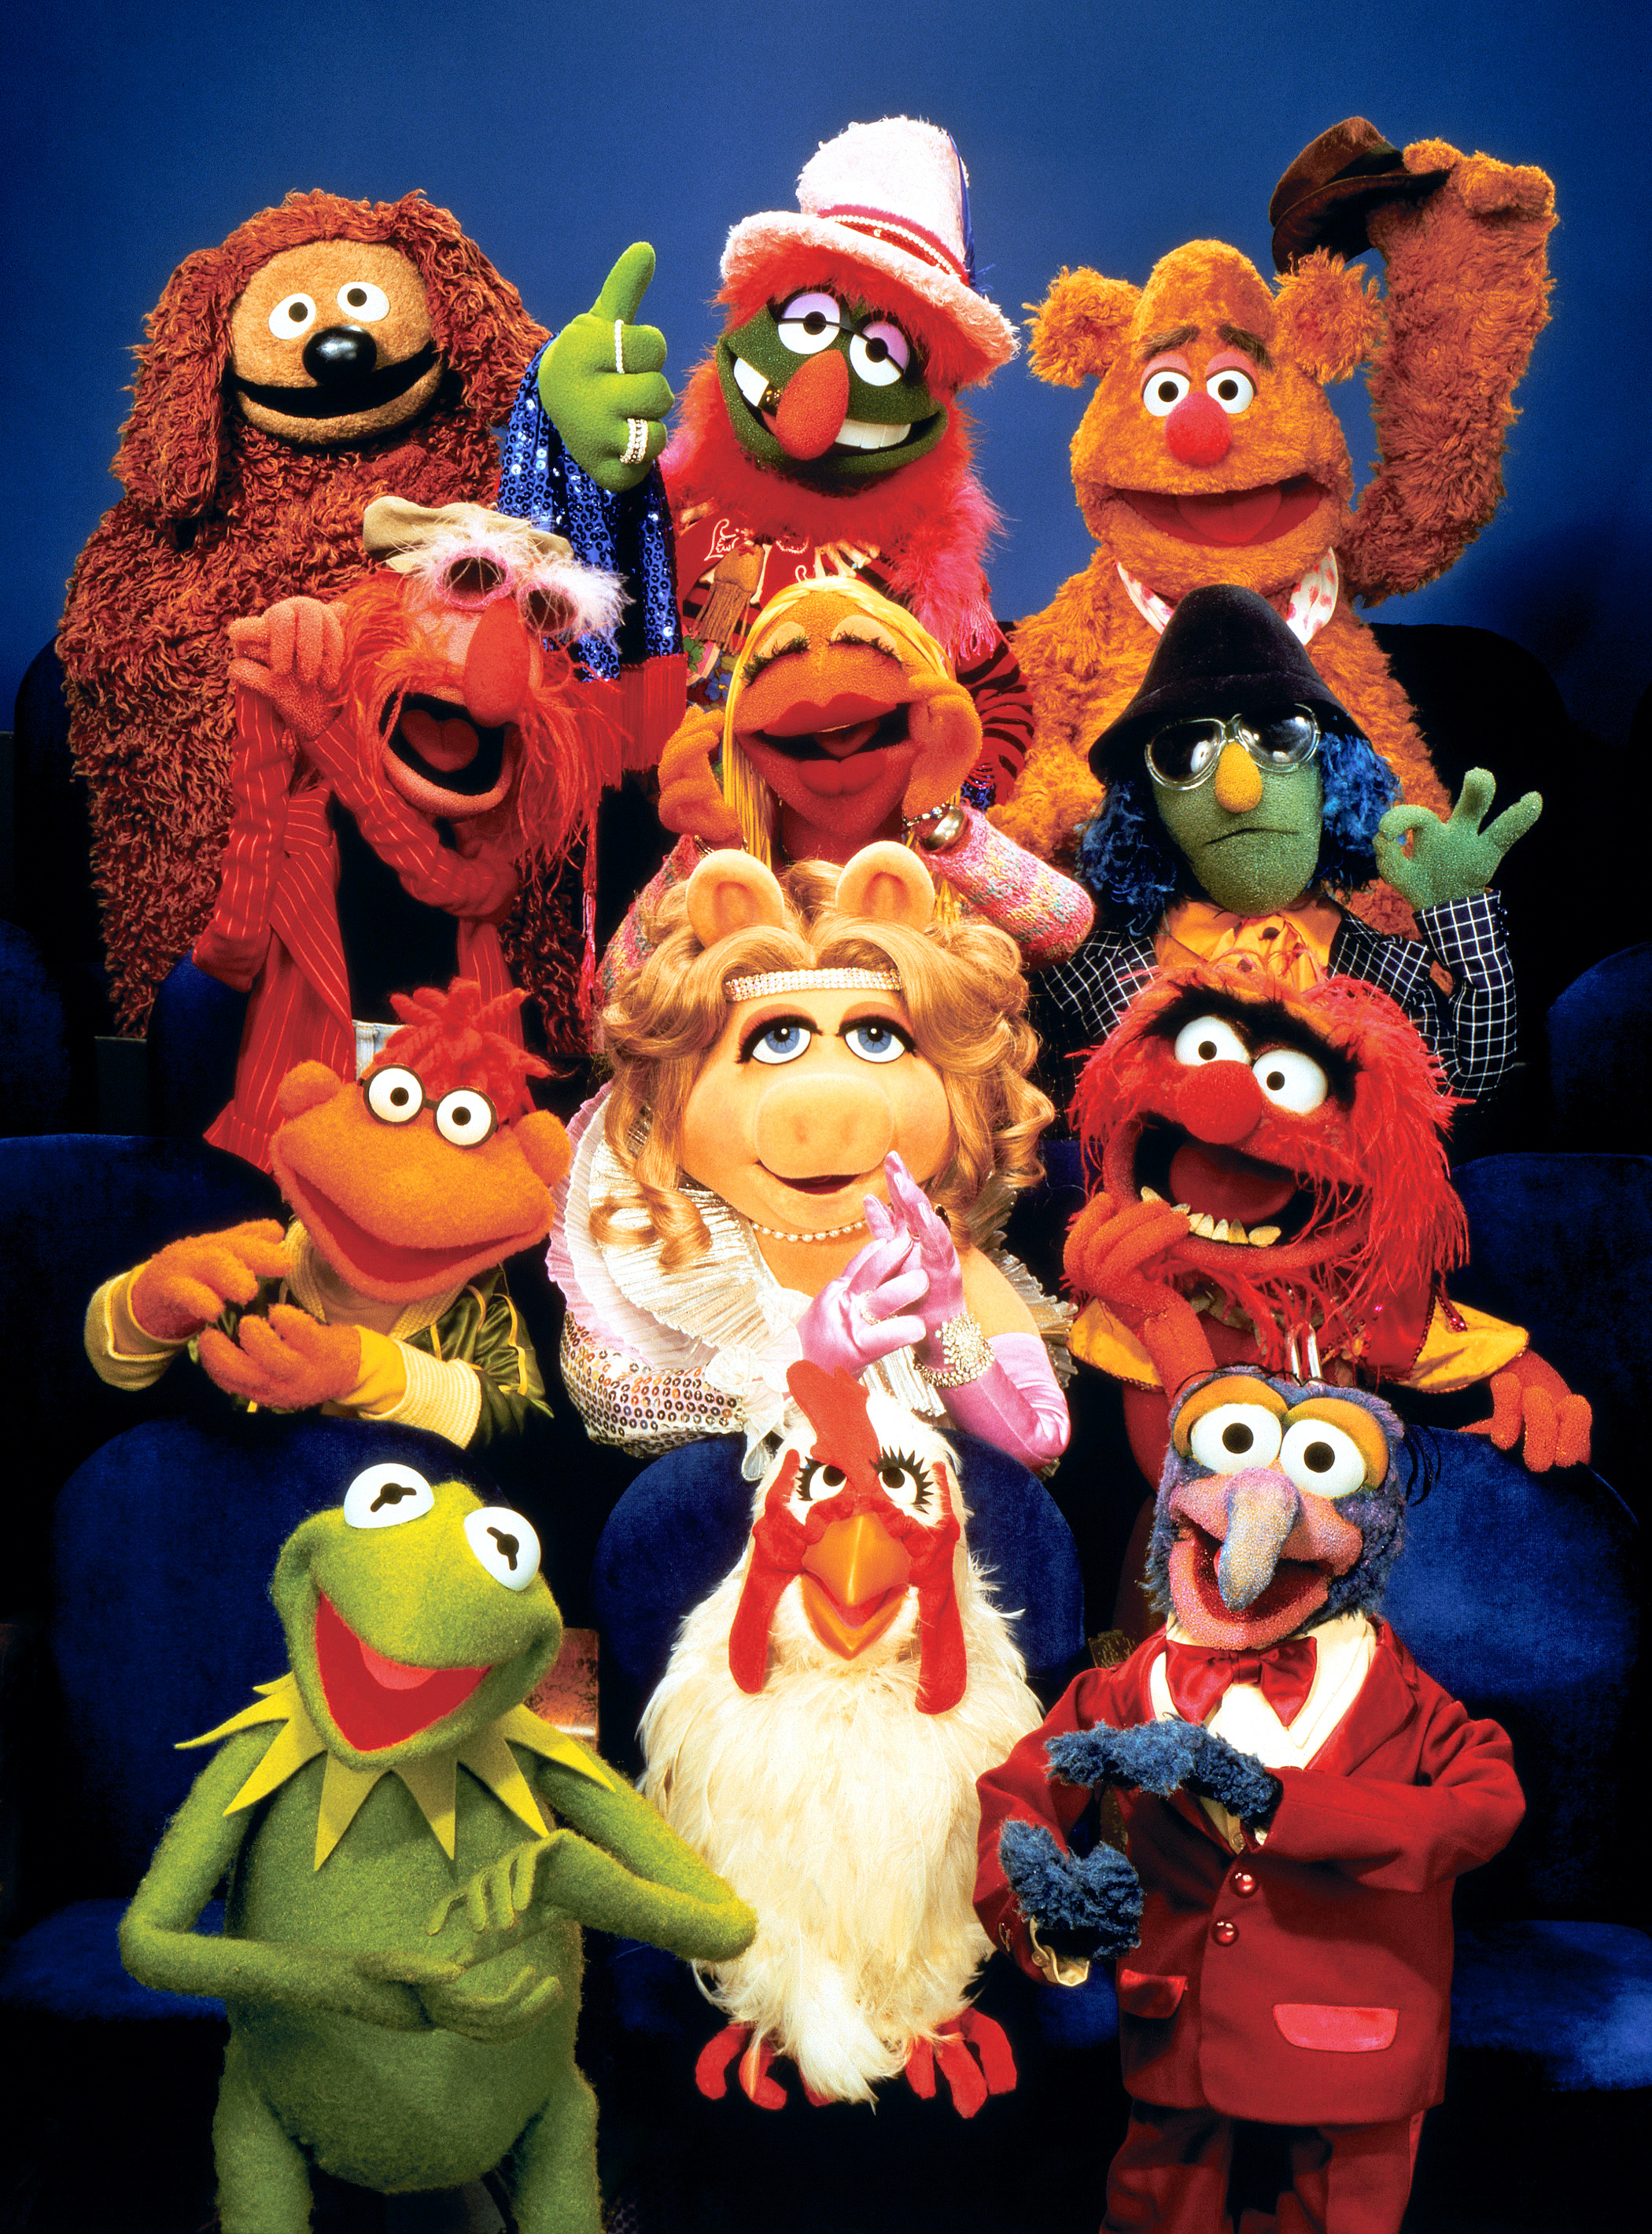 The Muppets #8